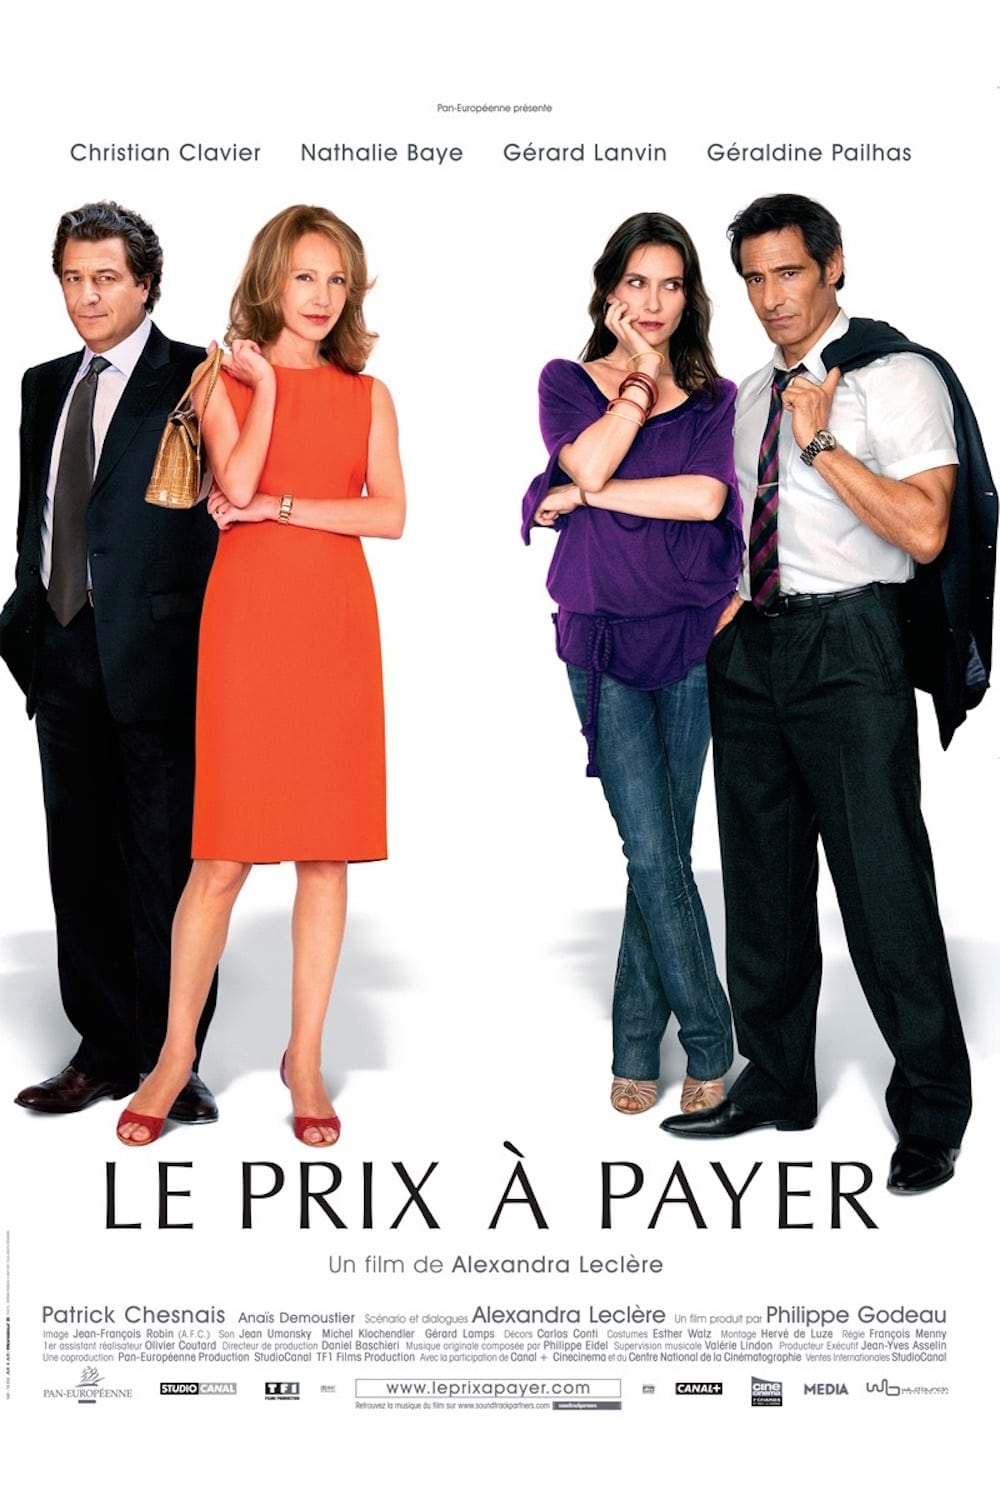 The Price to Pay (2007)